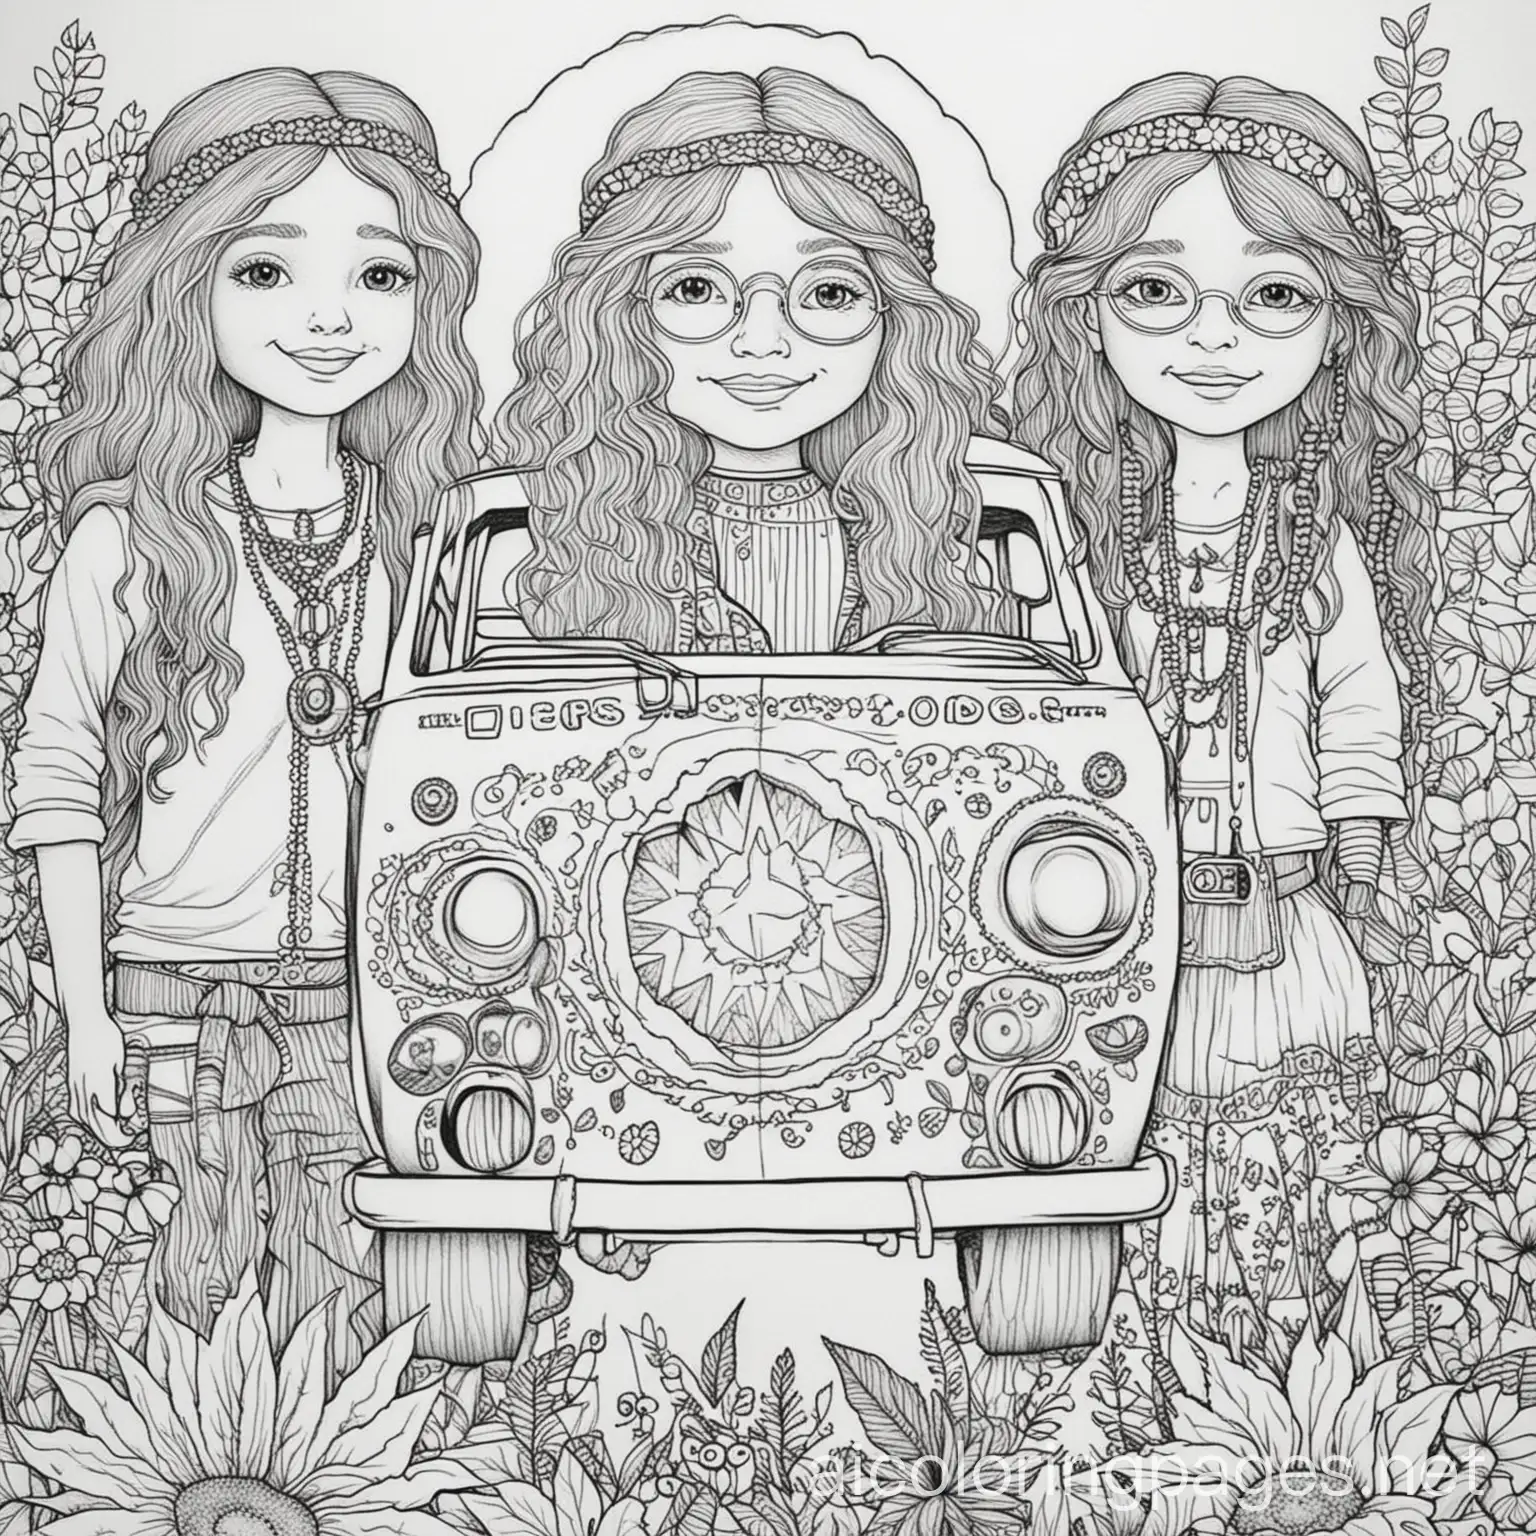 Simple-Hippie-Coloring-Page-EasytoColor-Line-Art-on-White-Background